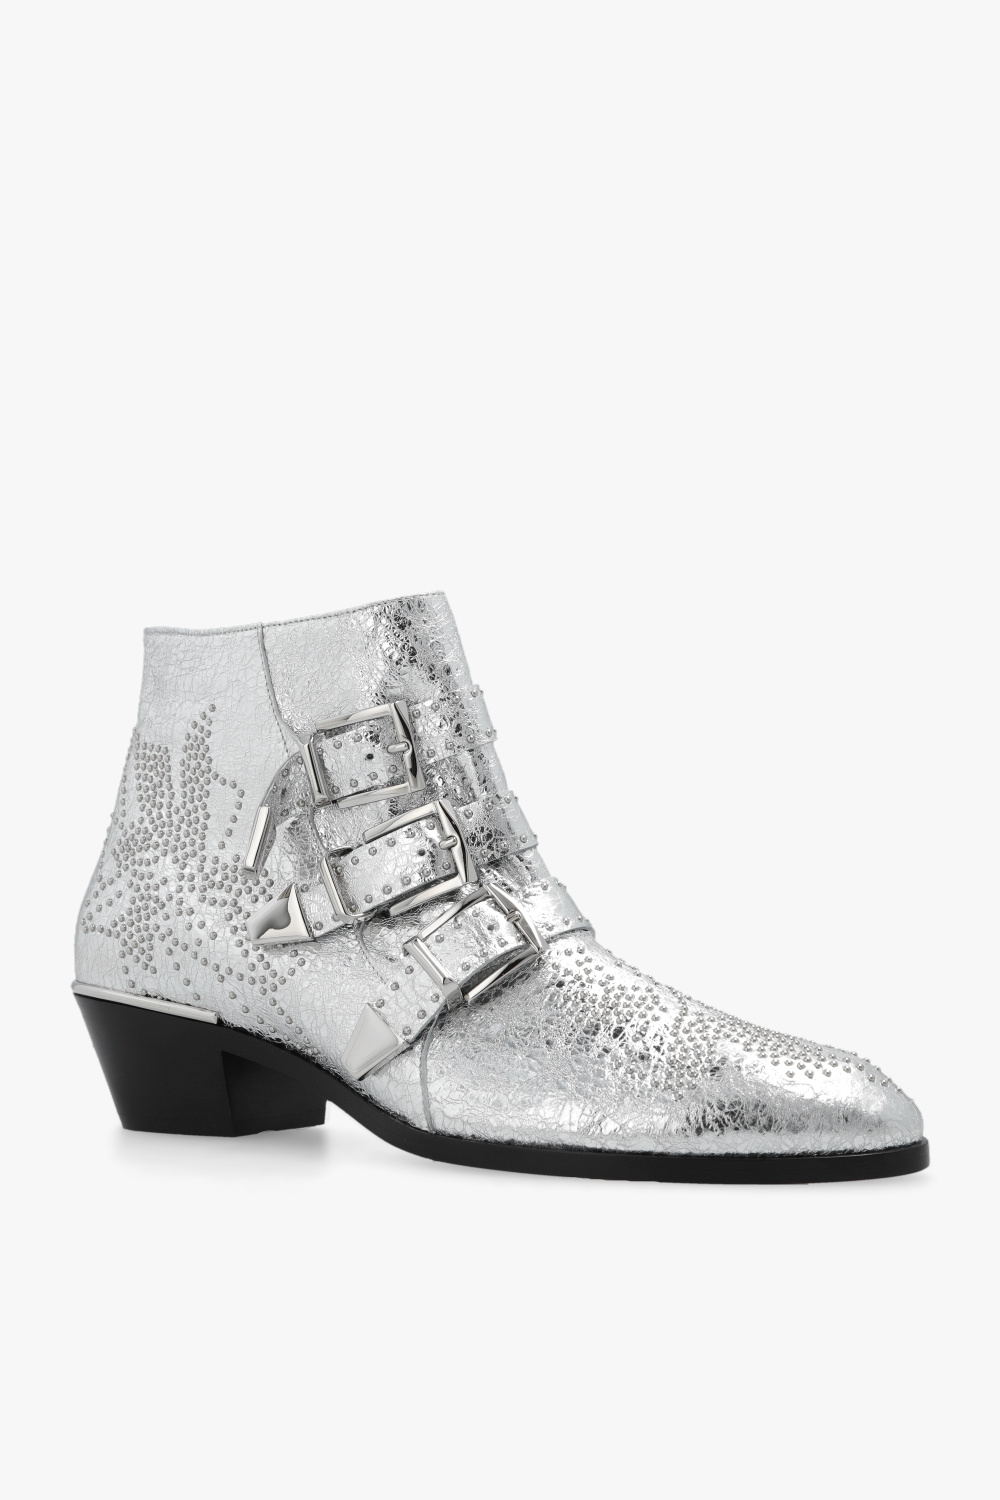 Chloé ‘Susan’ heeled ankle boots